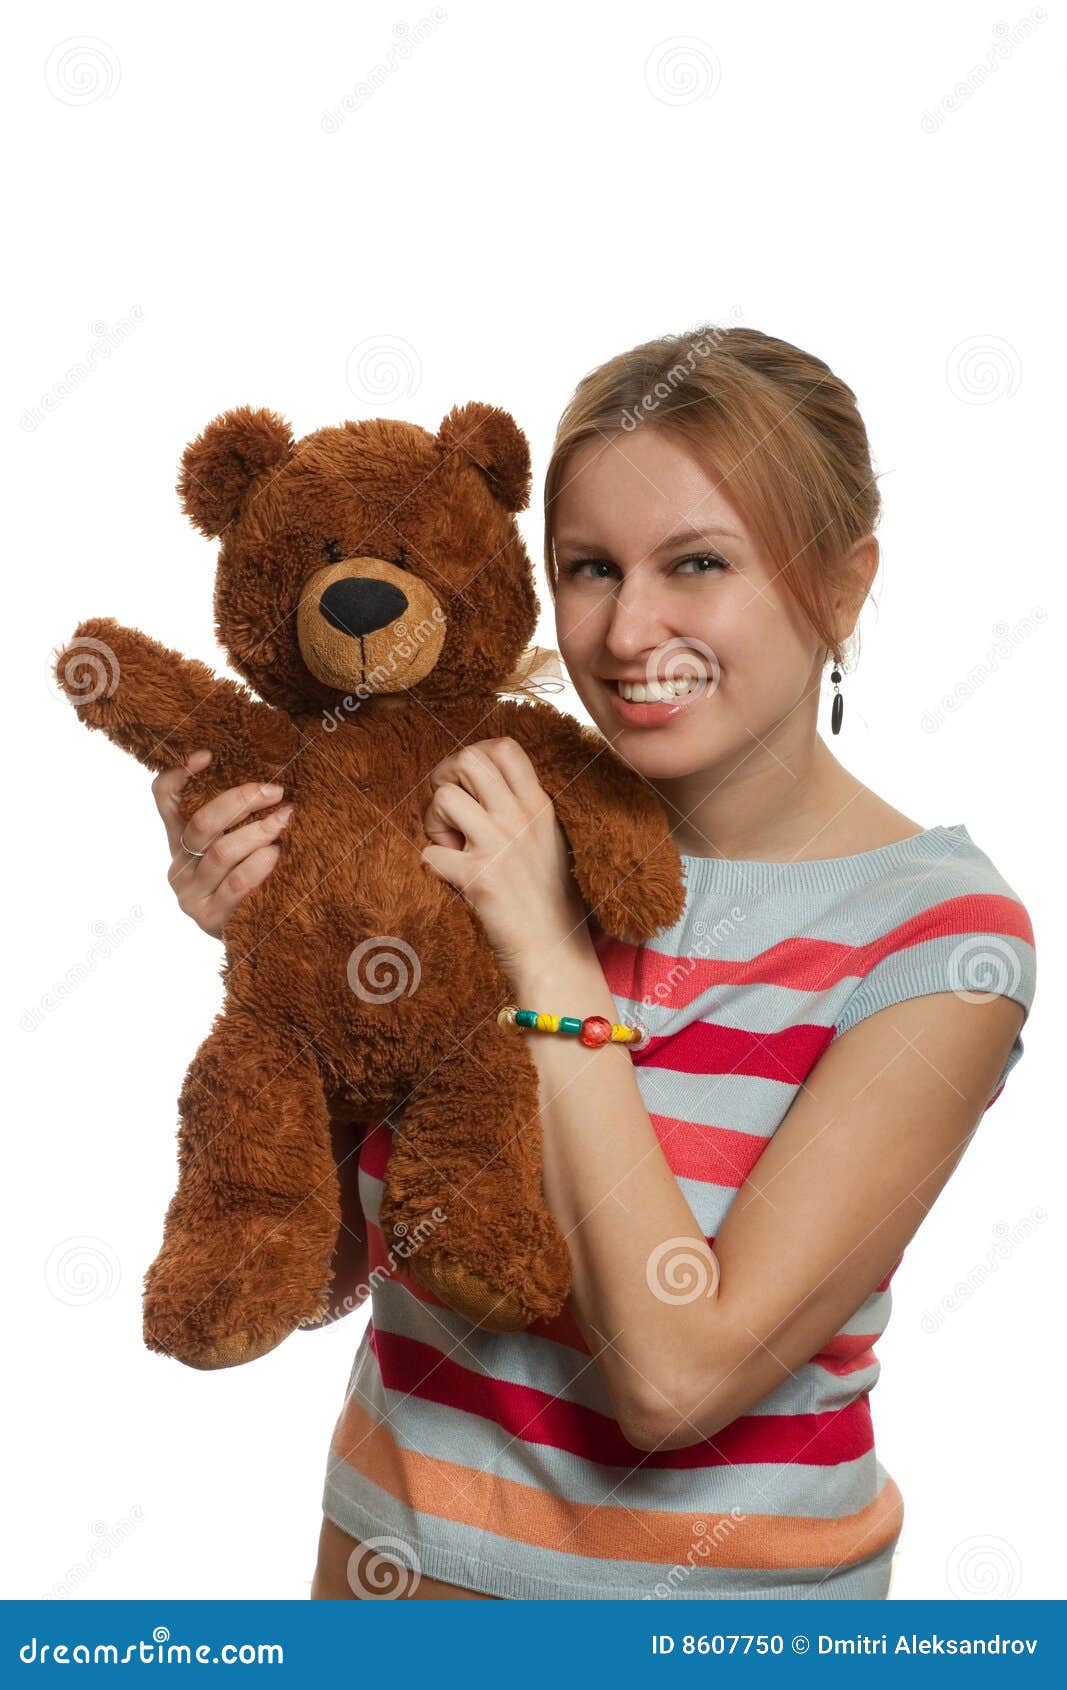 Girl with teddy bear stock photo. Image of lips, smiling - 8607750